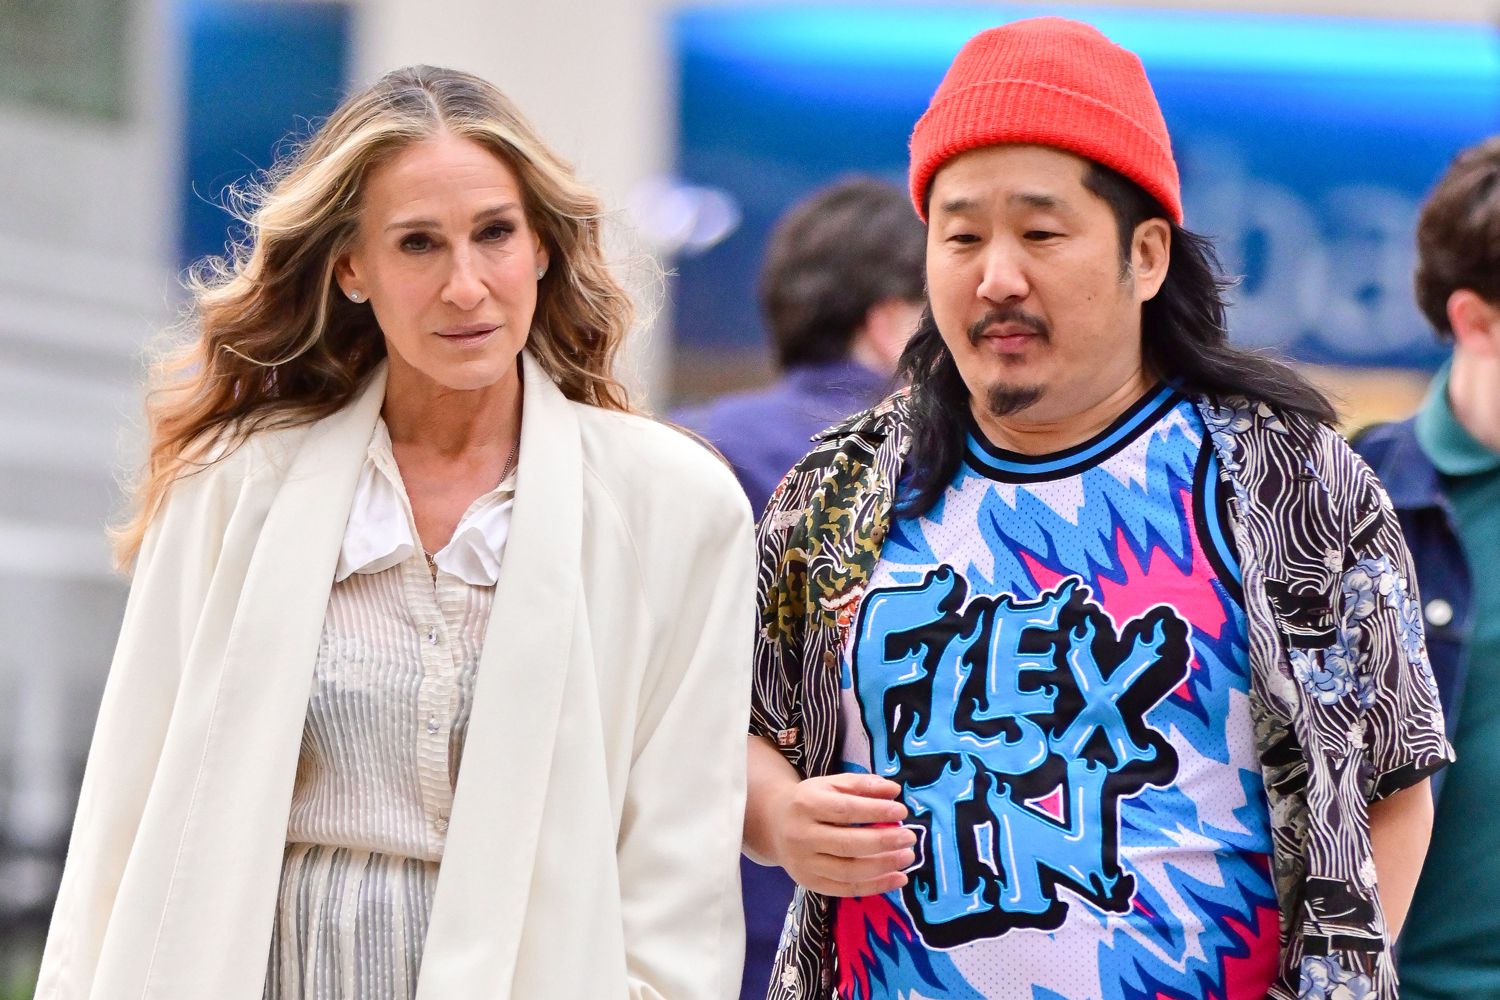 NEW YORK, NEW YORK - NOVEMBER 07: Sarah Jessica Parker and Bobby Lee seen on the set of "And Just Like That..." the follow up series to "Sex and the City" in Madison Square Park on November 07, 2021 in New York City. (Photo by James Devaney/GC Images)